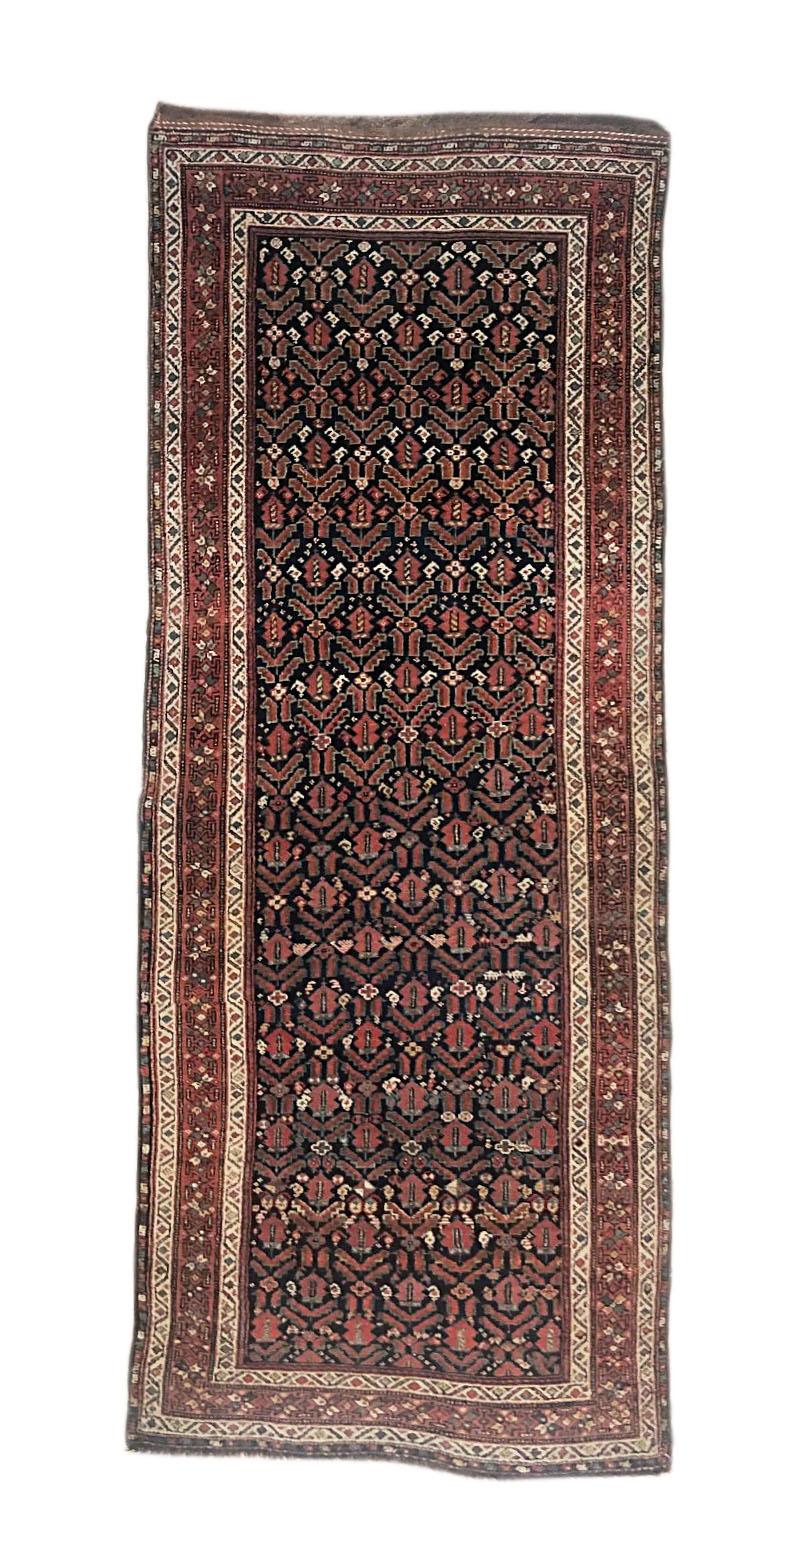 This antique rug is a Persian Kurdish with wool pile and wool foundation. The design is geometric all-over, circa 1940s. The size is 4 feet wide by 10 feet 6 inches tall.